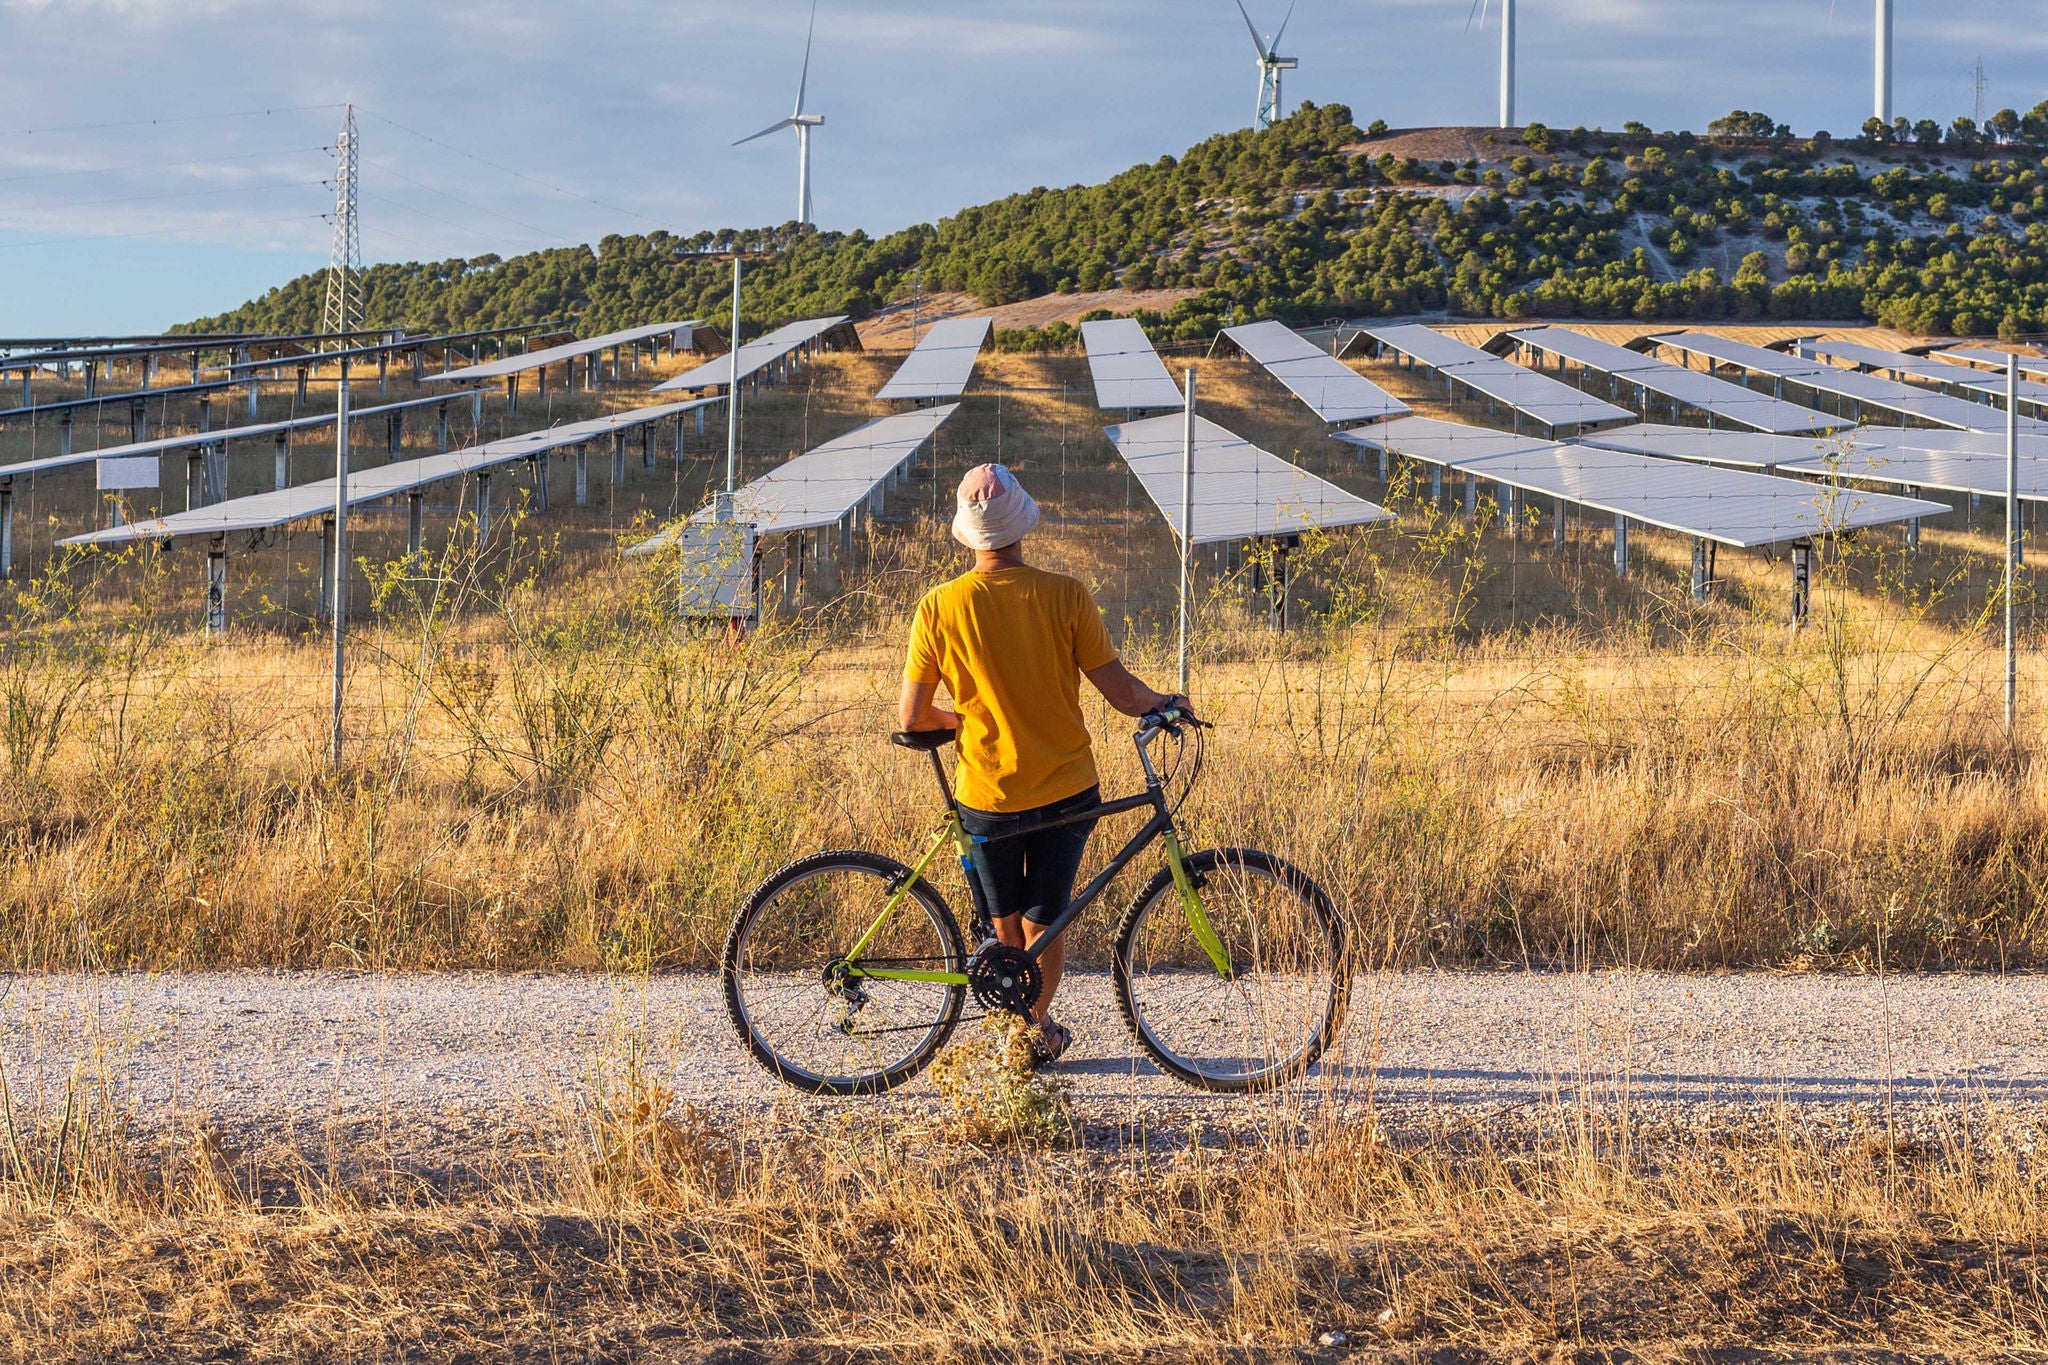 Castilla y Leon, Spain. Man from behind leaning on bicycle looking at wind power towers and solar farm in rural setting at sunset